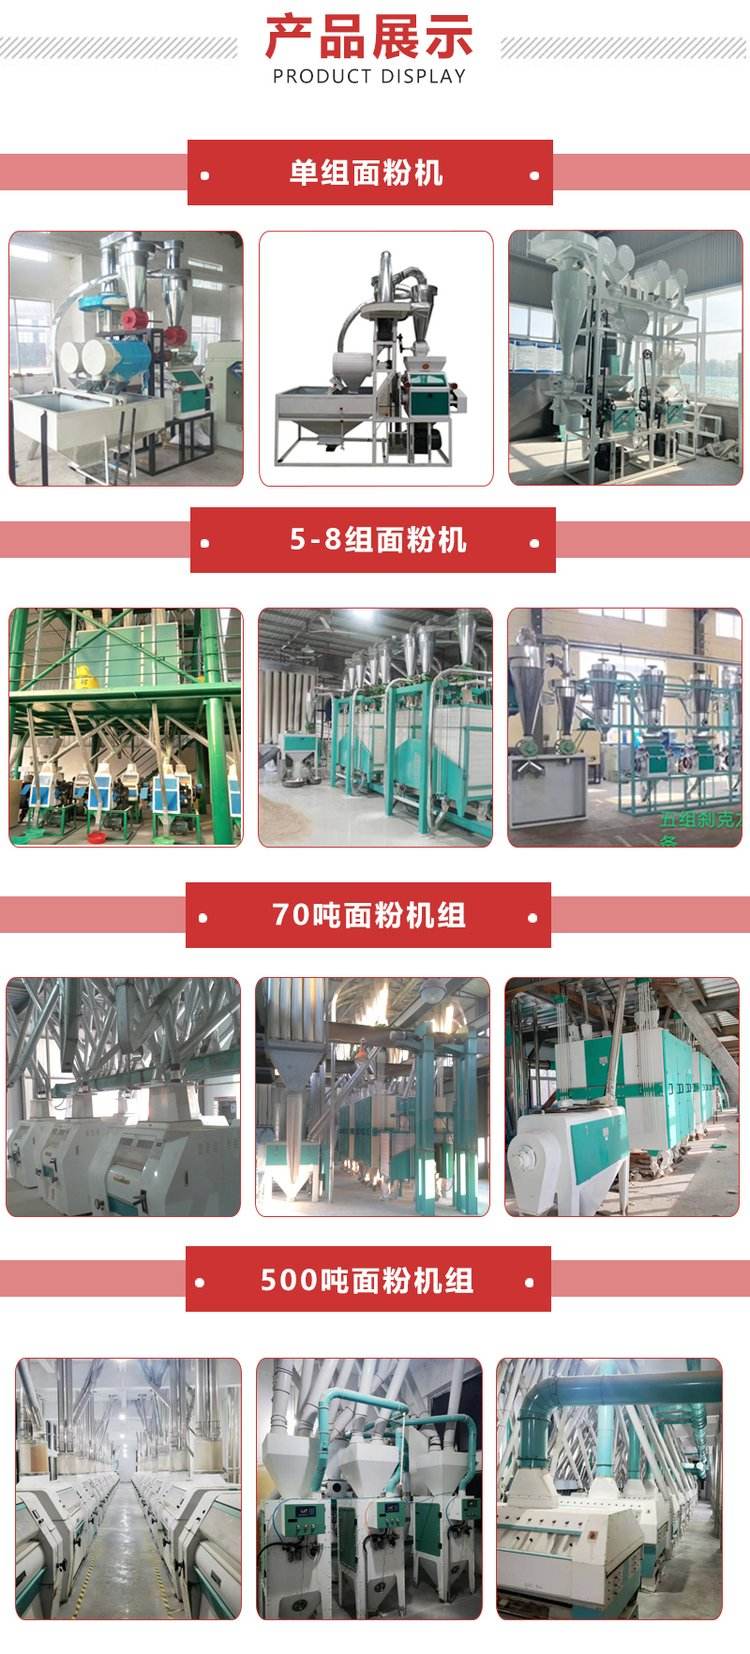 A fully automatic new single machine 50 noodle making machine for farmers to eat and grain themselves